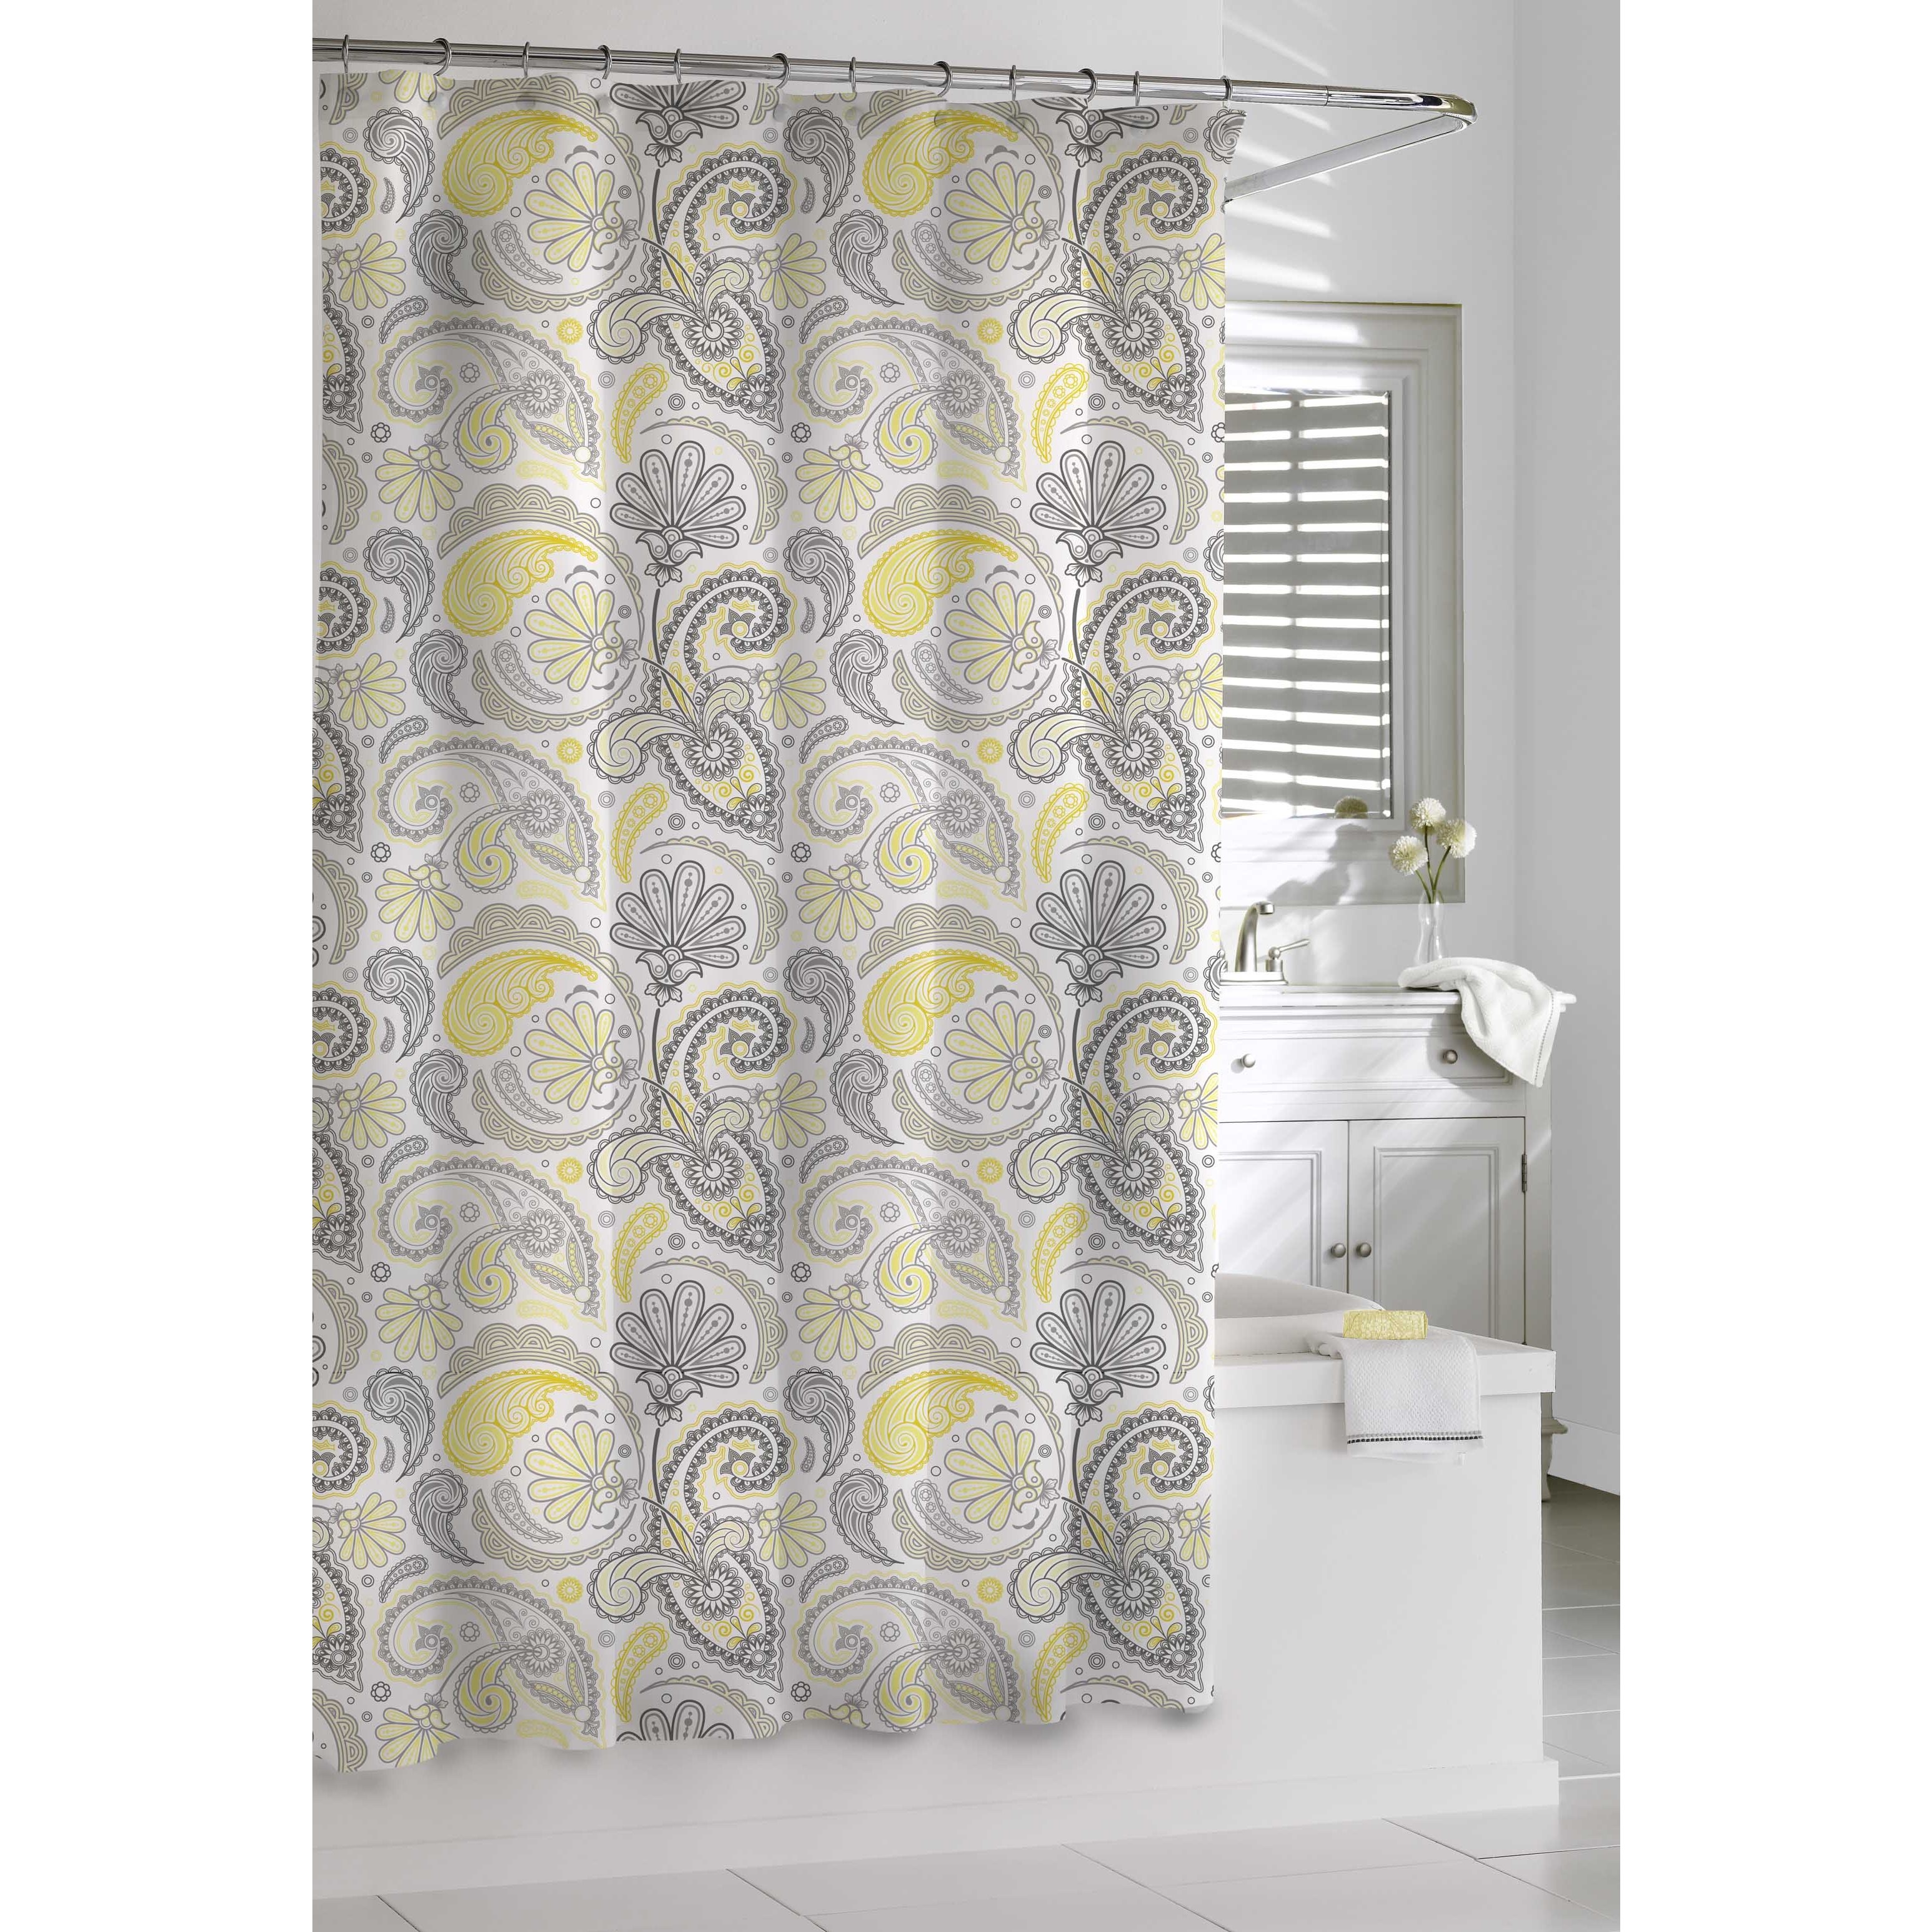 Garden Paisley Yellow and Grey Shower Curtain   Overstock   8973865